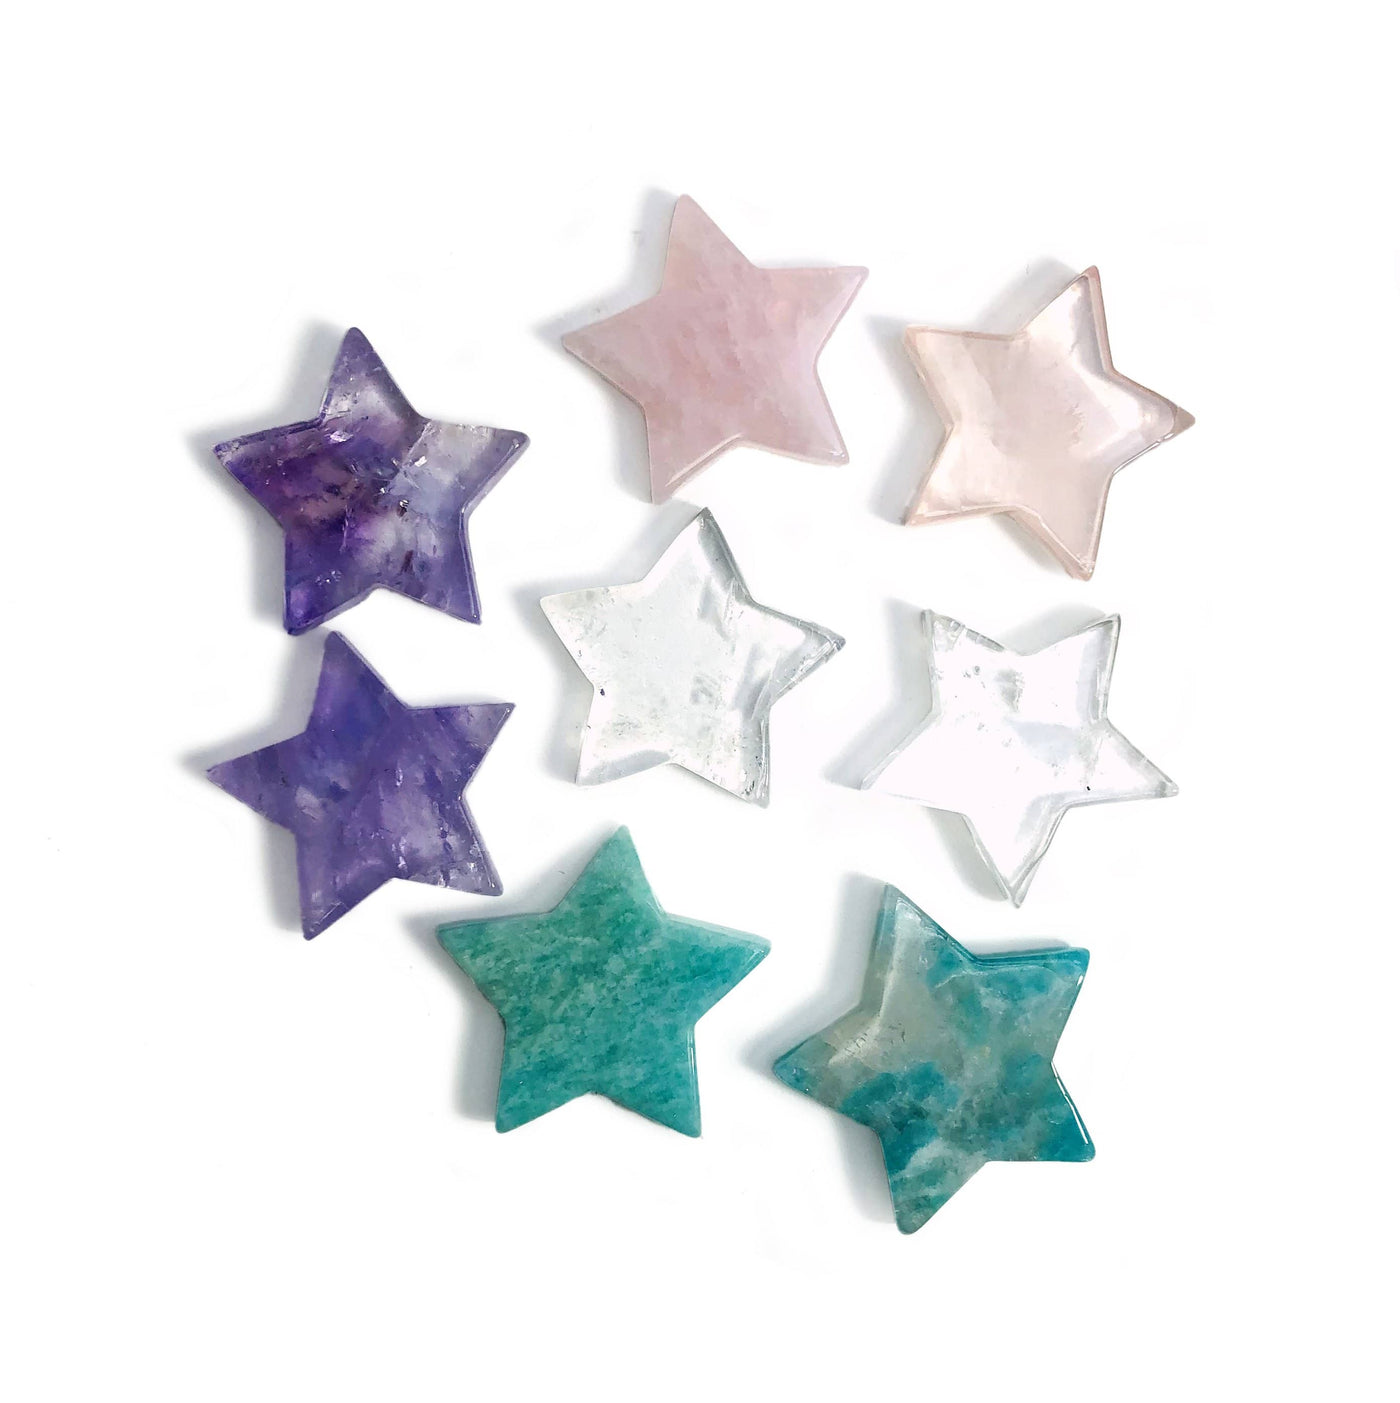 8 Products Gemstone Star Cabochons in different stones on white background